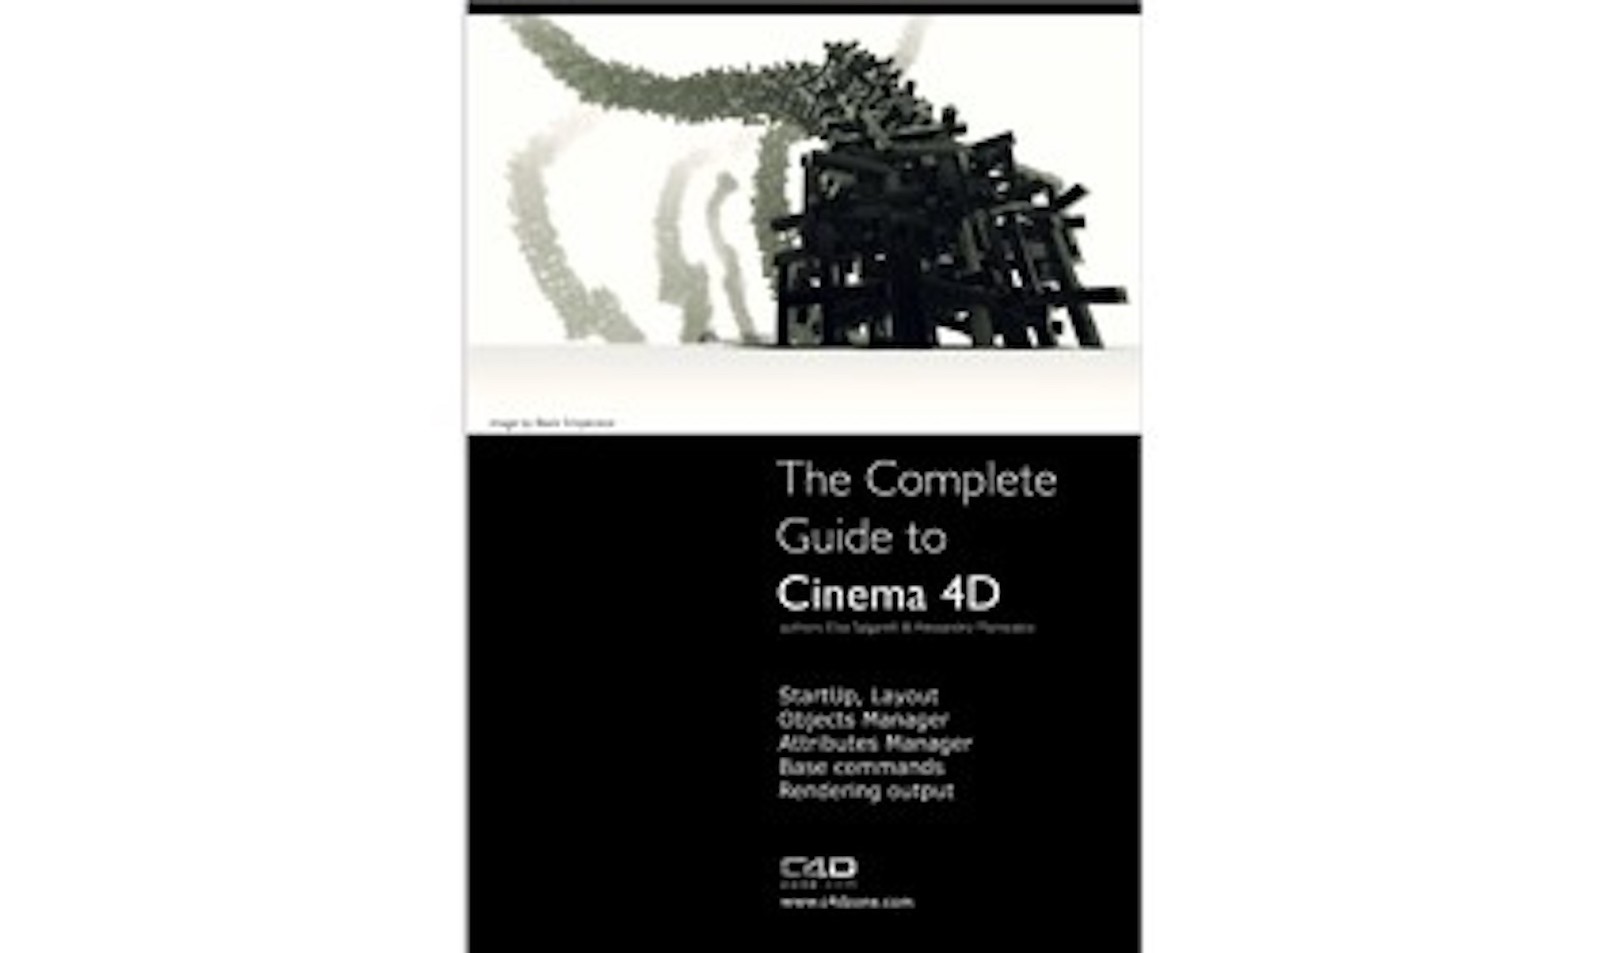 The Complete Guide to Cinema 4D